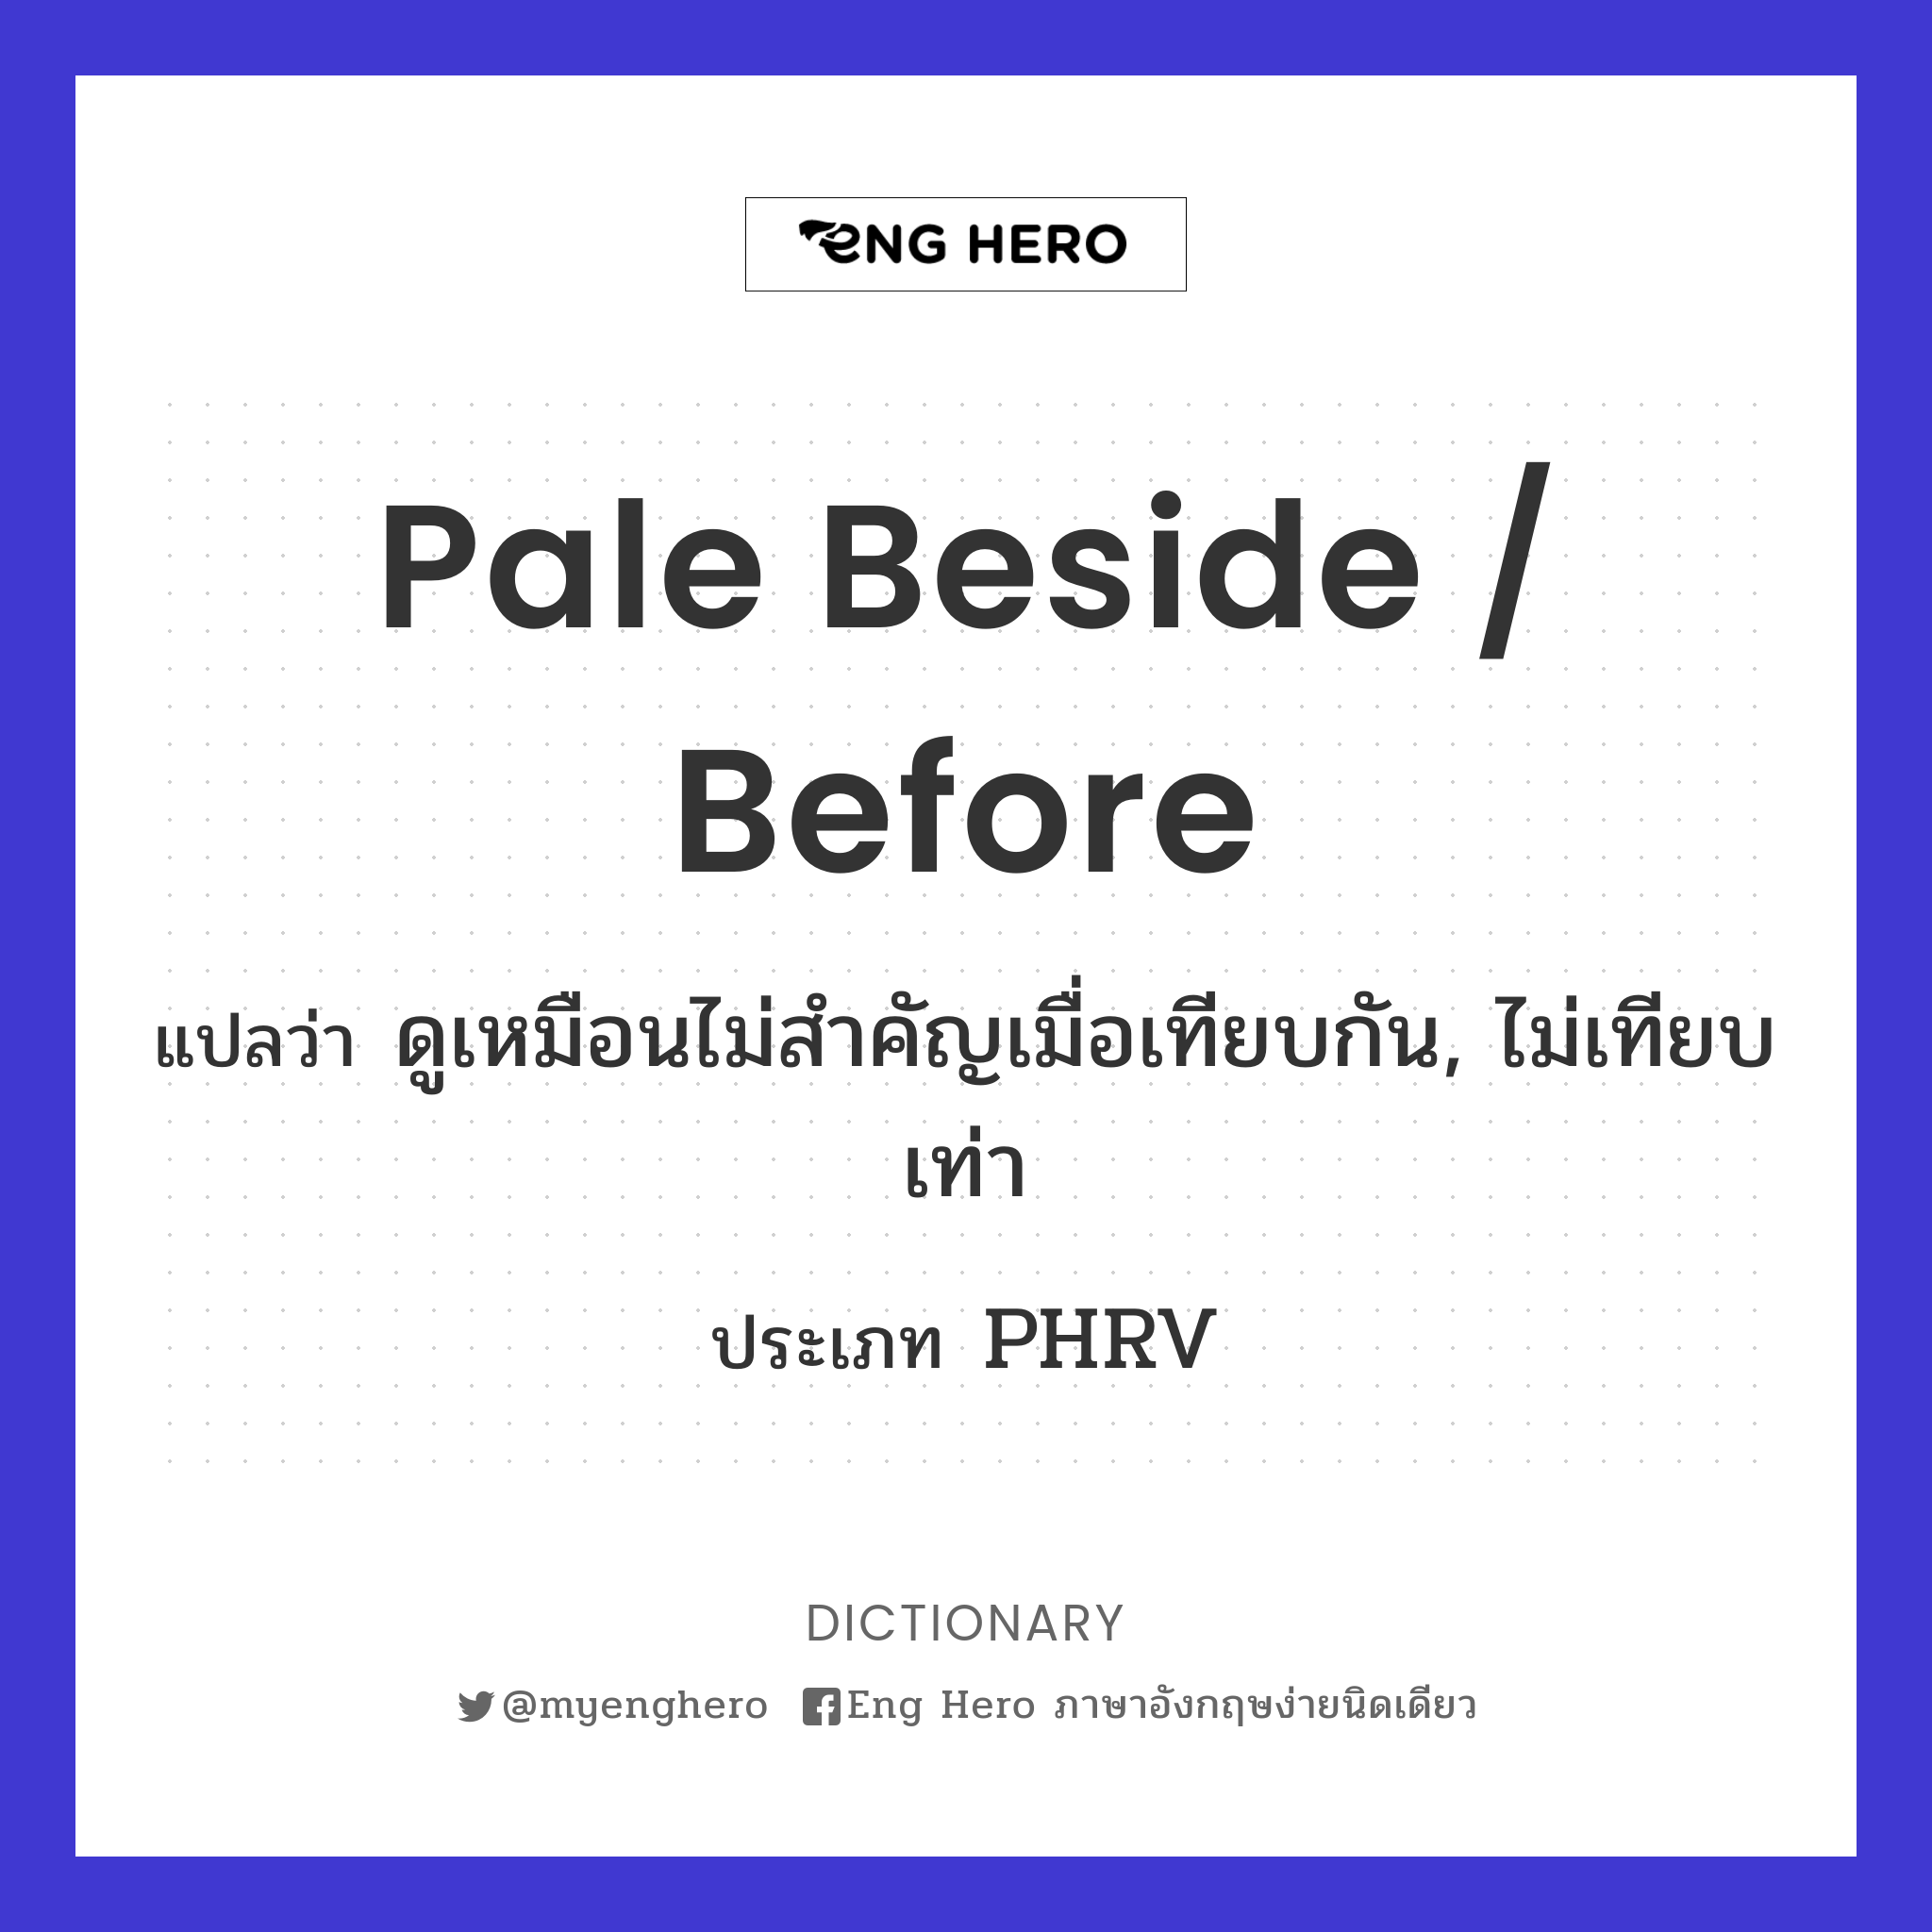 pale beside / before